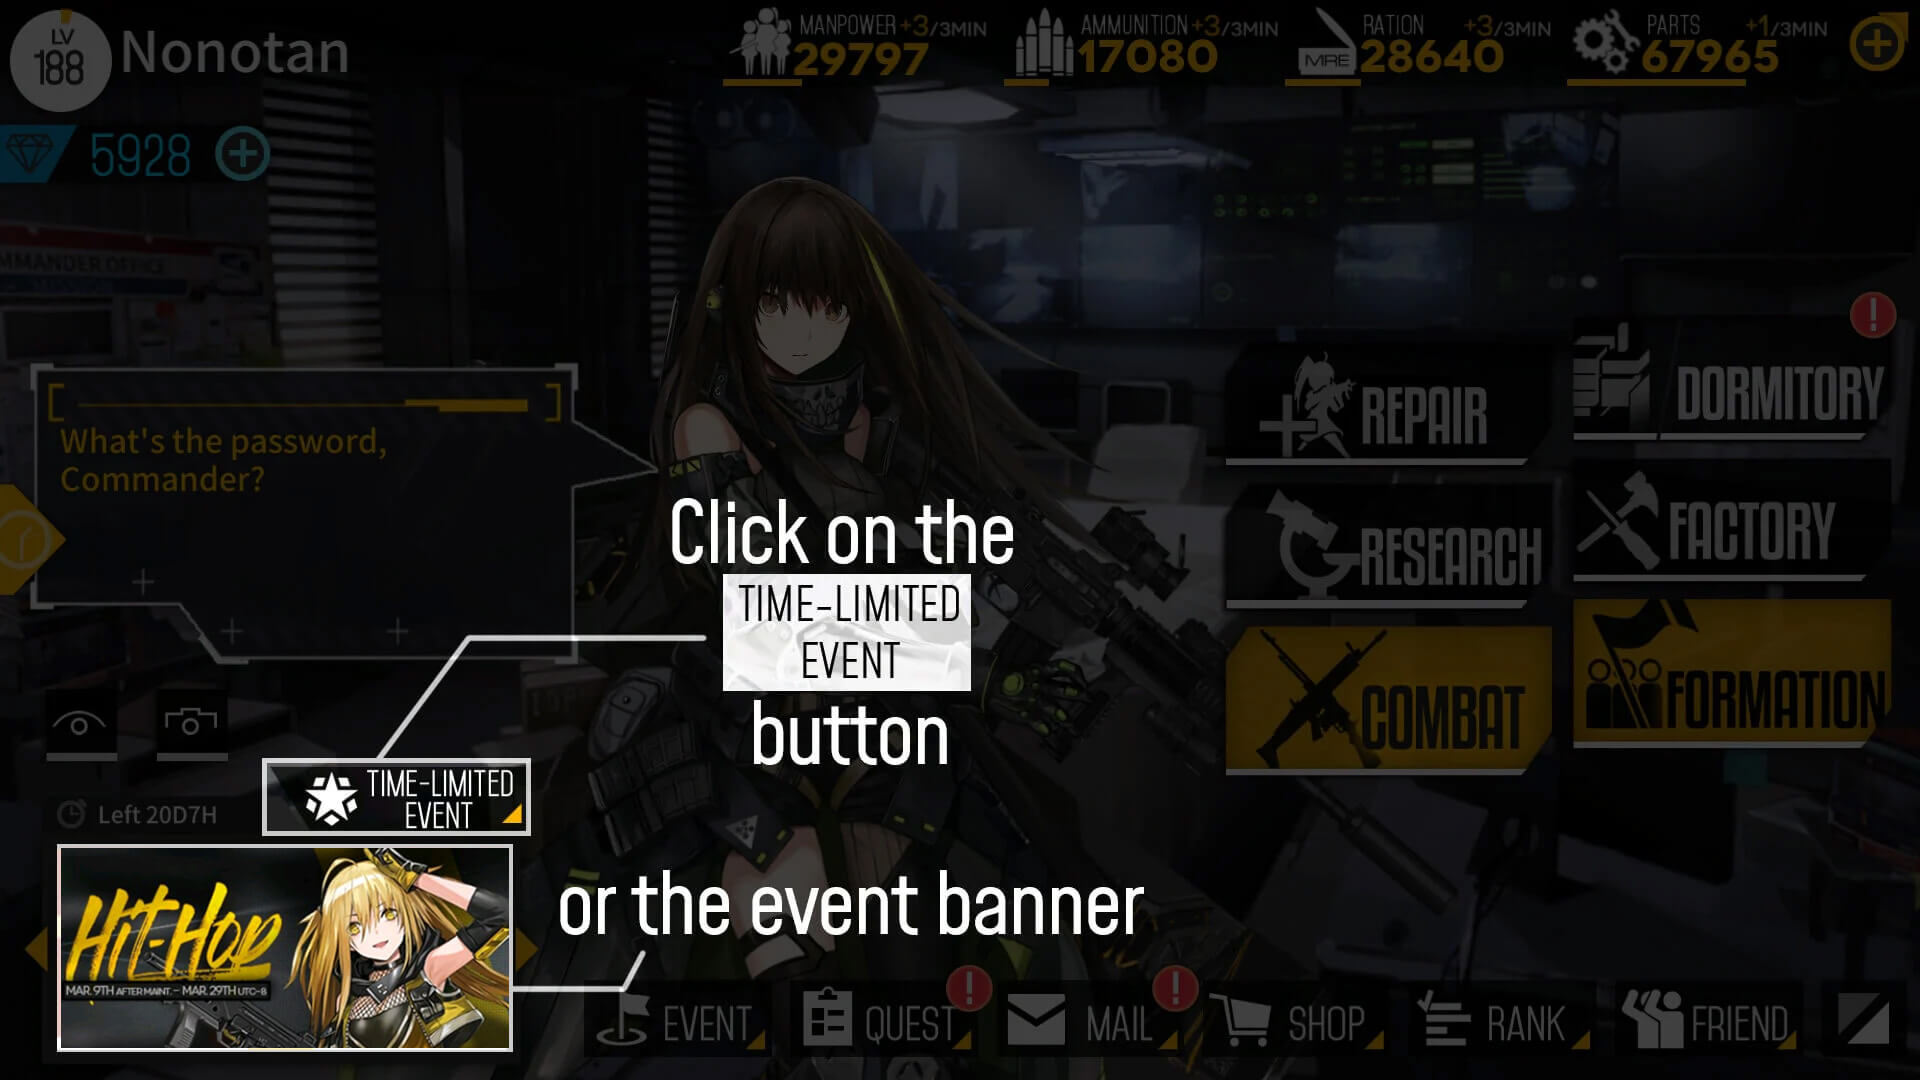 Accessing the Hit-Hop Point Event from GFL UI